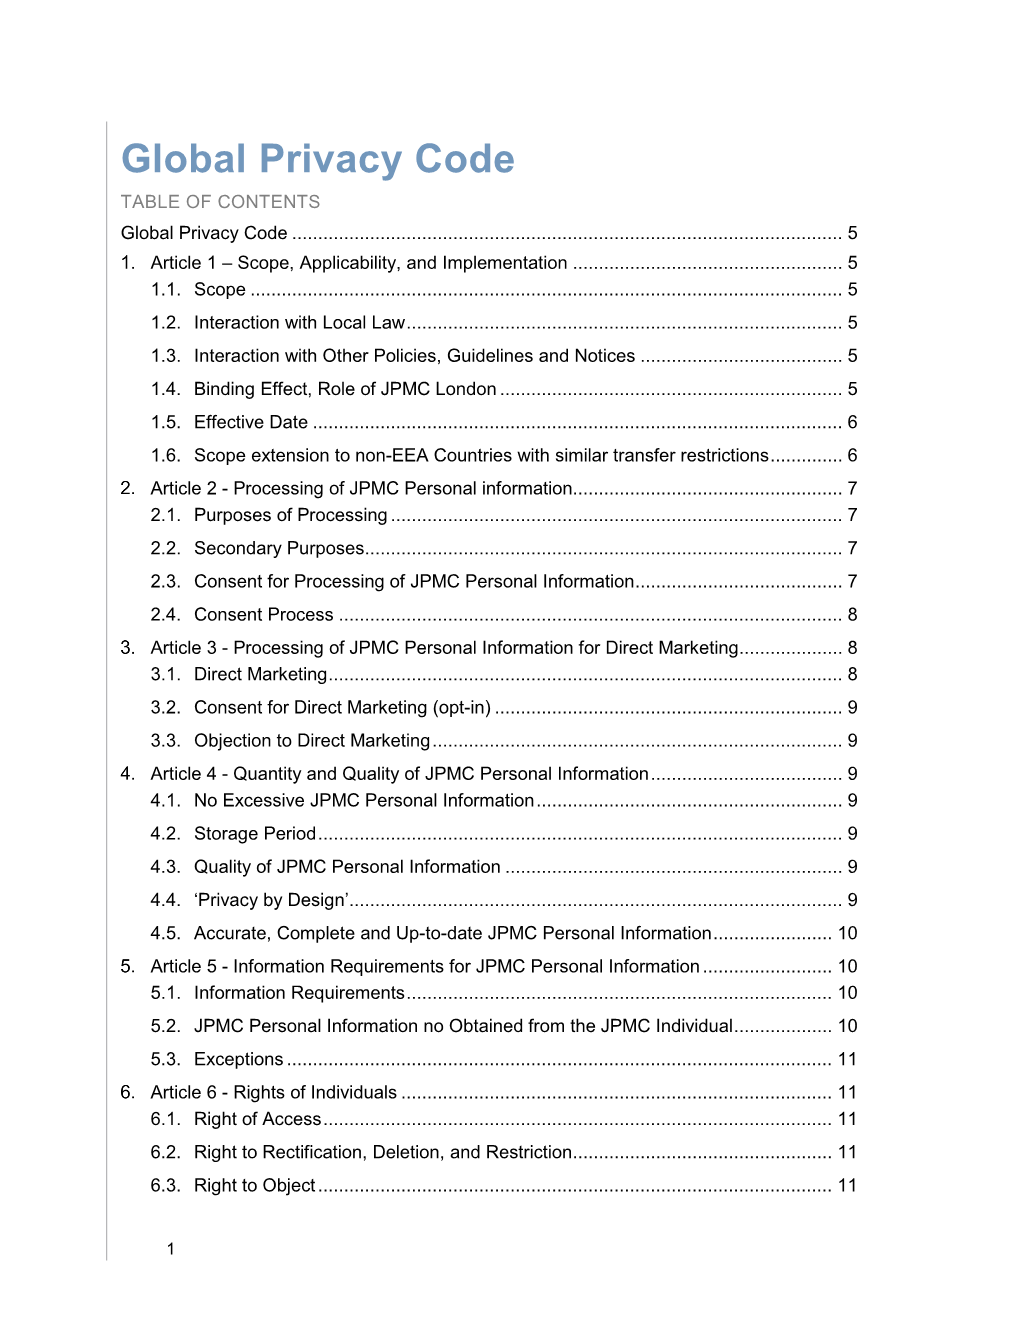 Global Privacy Code (Controller) (PDF)